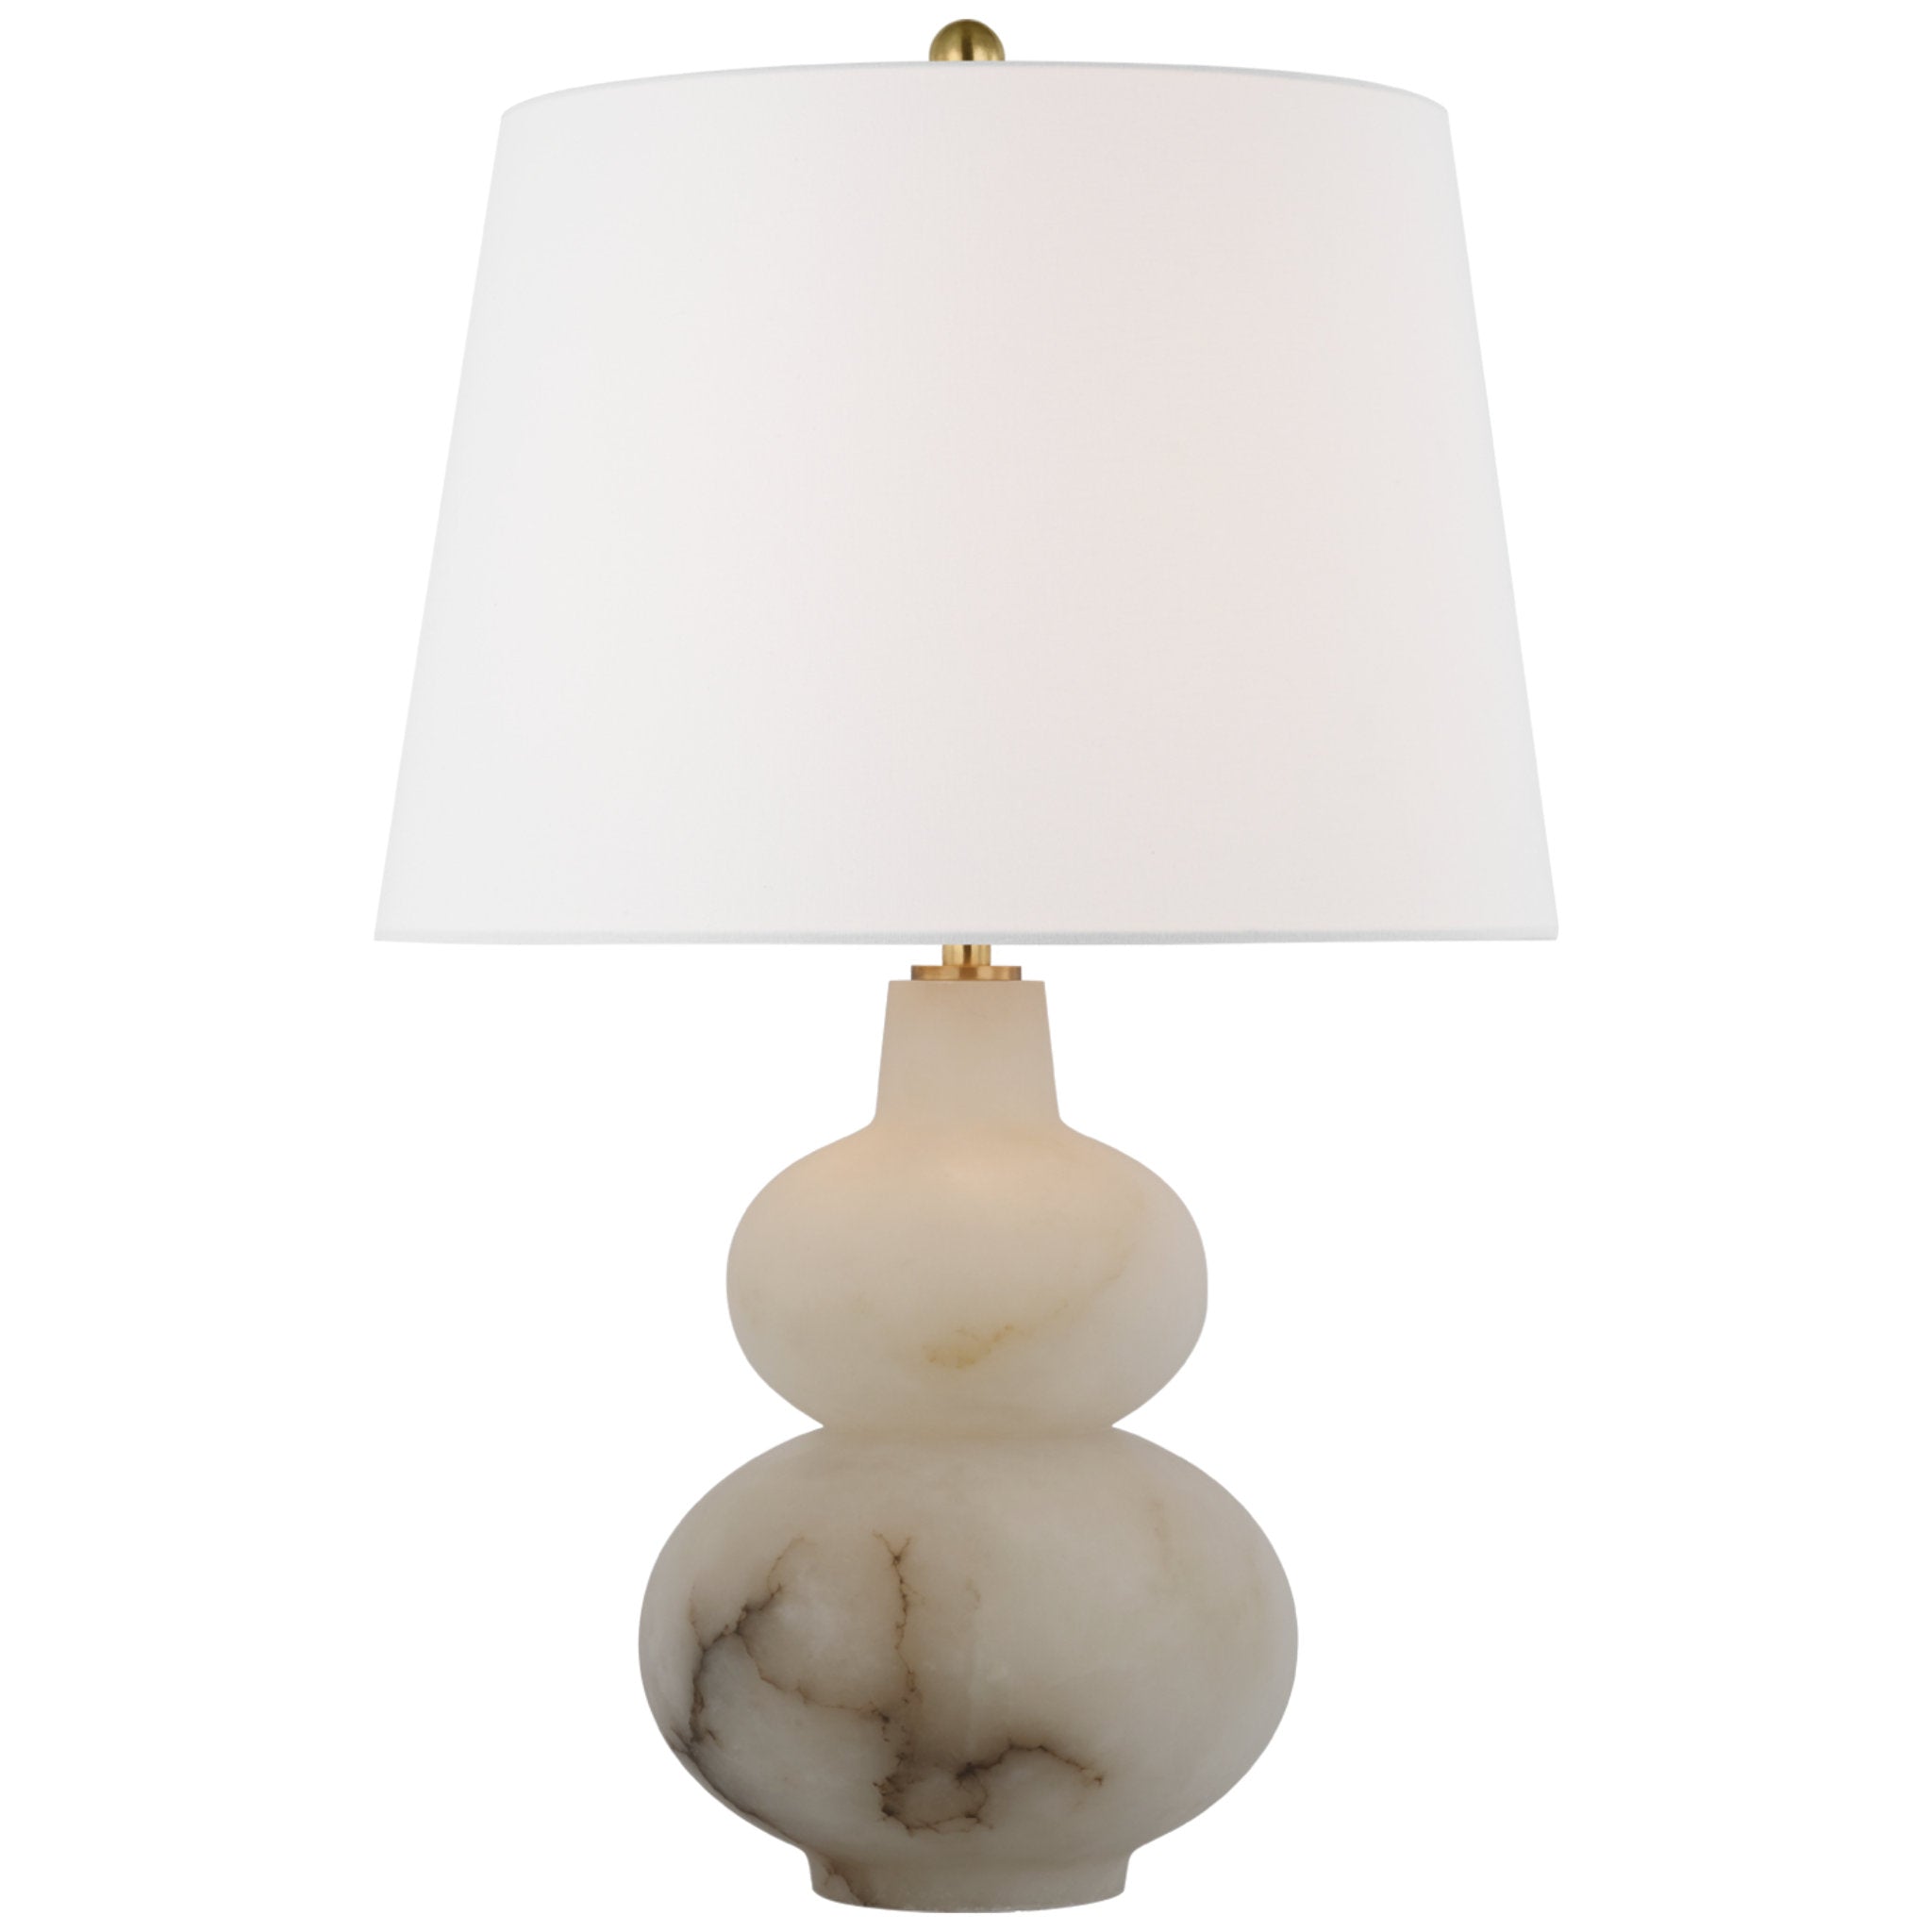 Thomas O'Brien Ciccio Large Table Lamp in Alabaster with Linen Shade